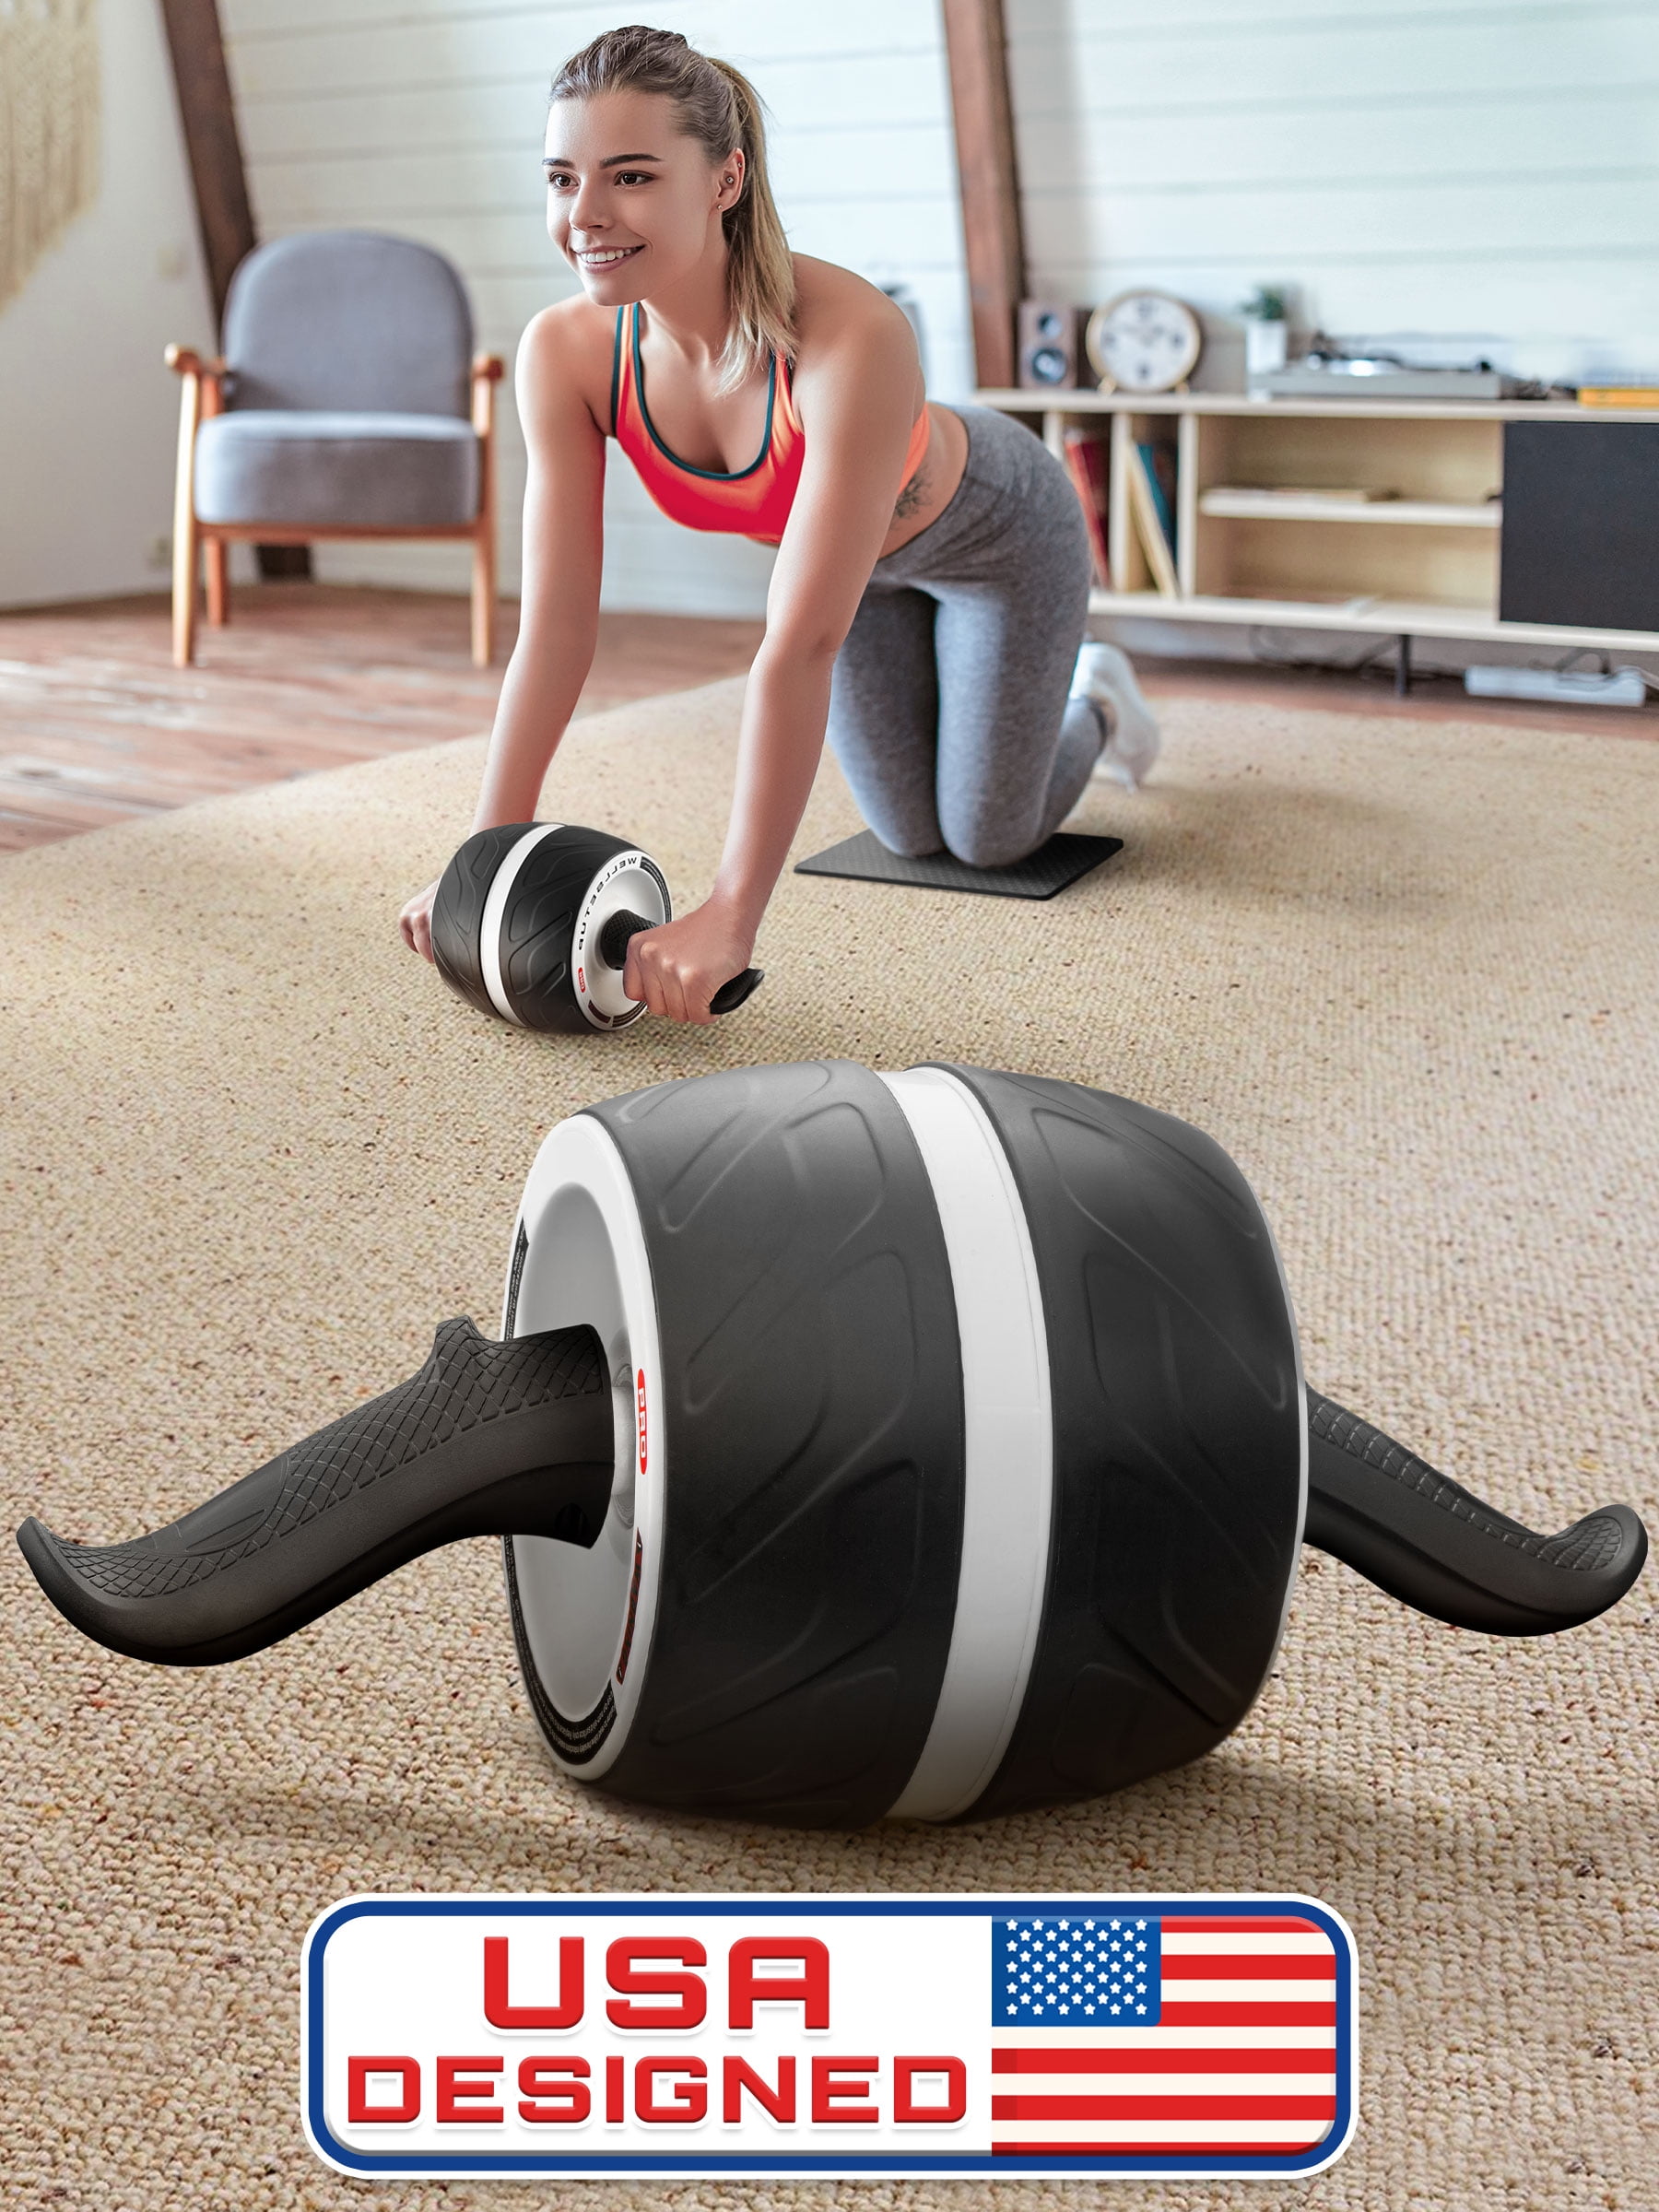 Ab Roller Wheel With Knee Mat